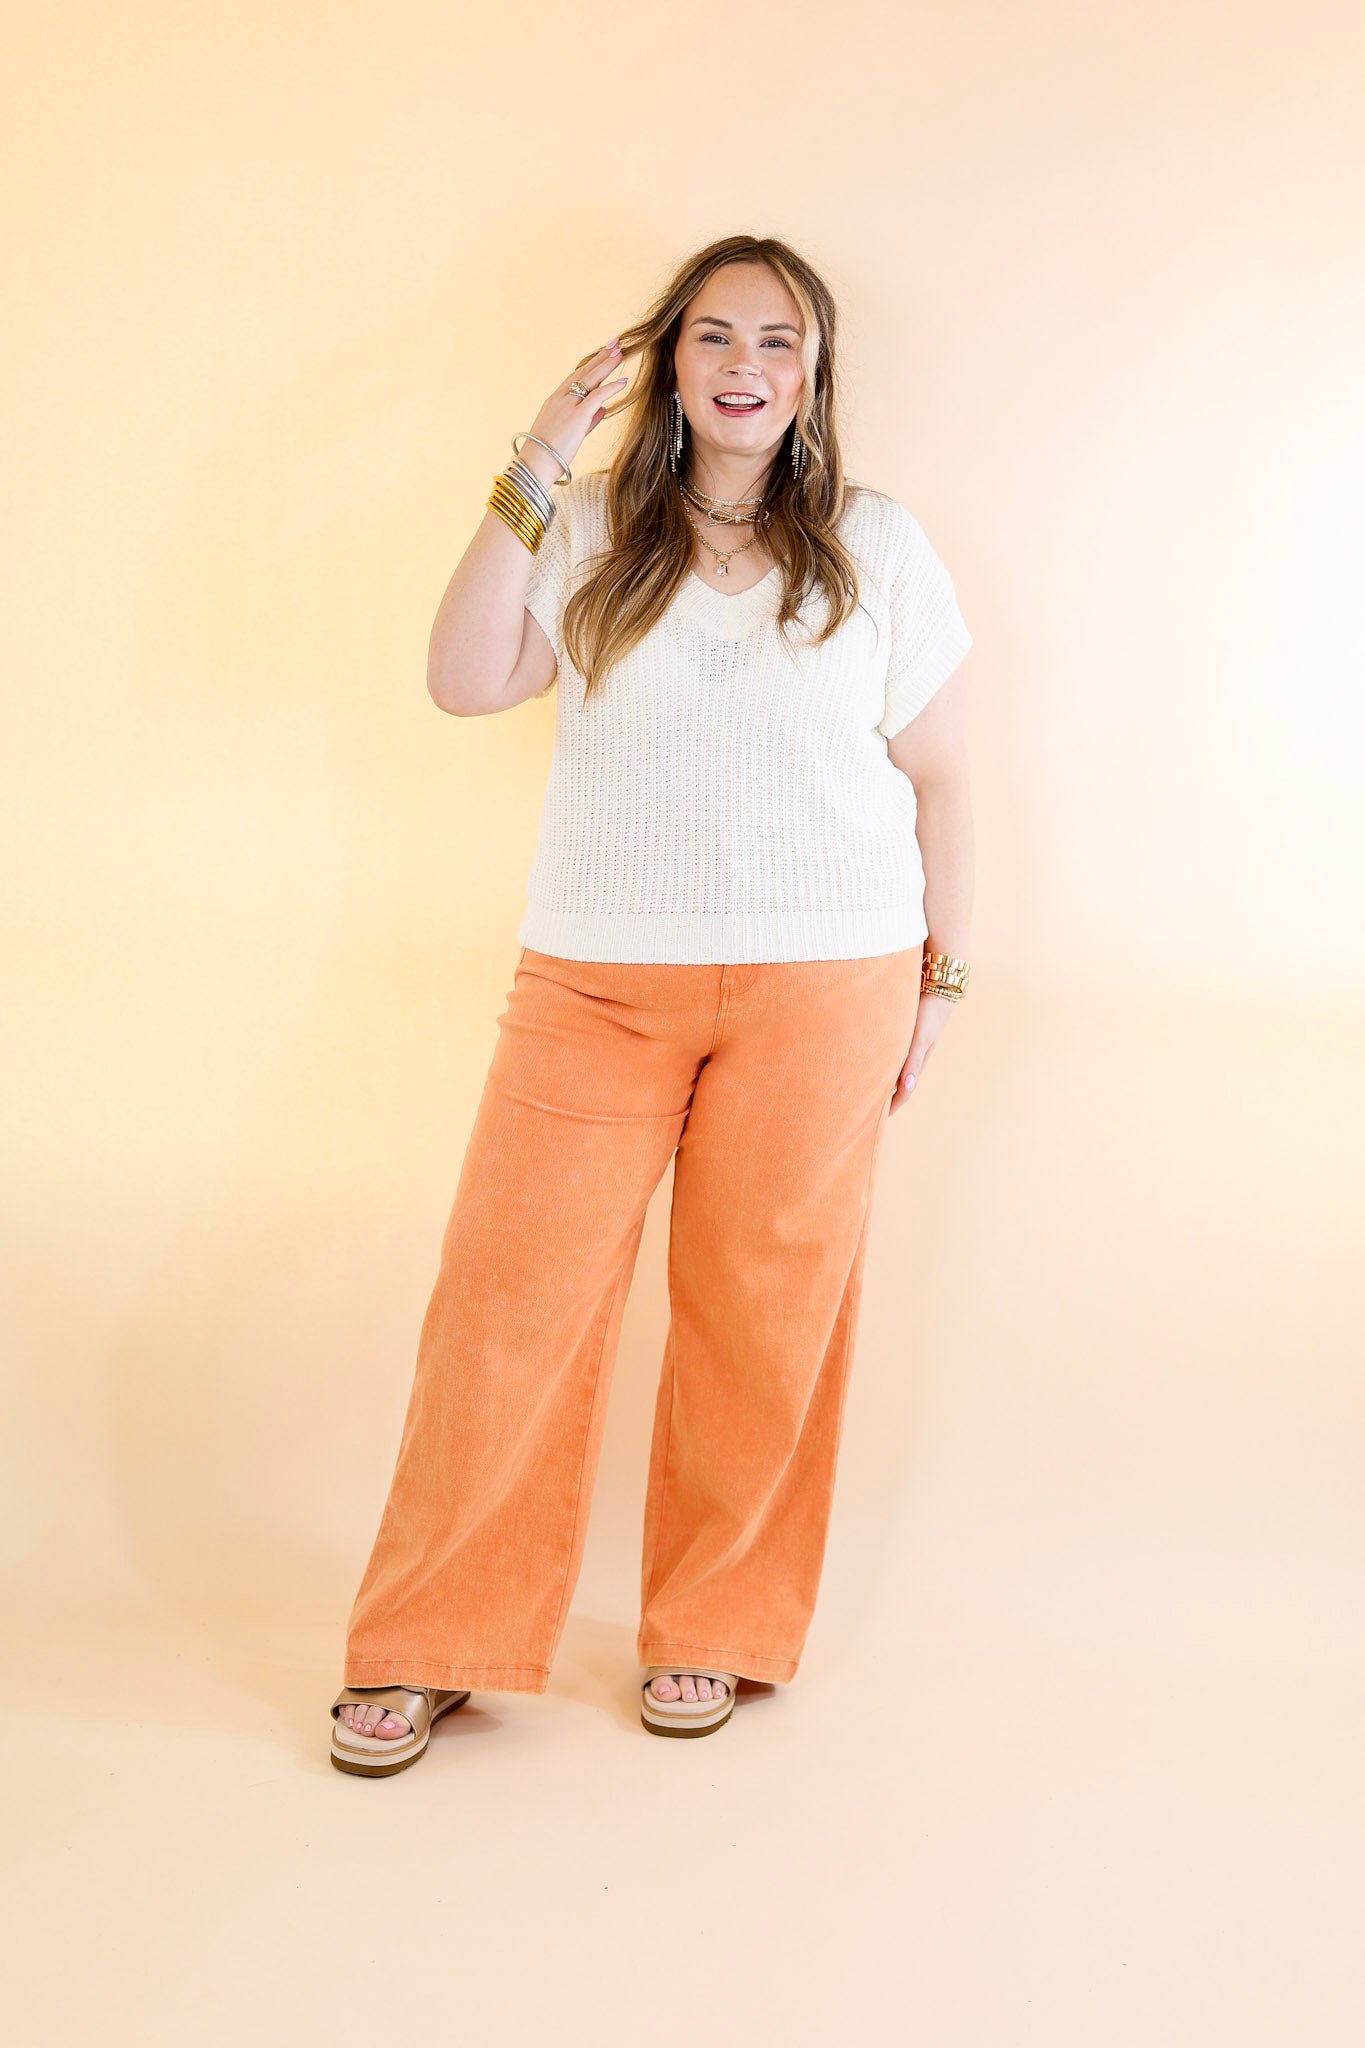 The Best Cropped Wide Leg Jeans in Apricot Orange - Giddy Up Glamour Boutique